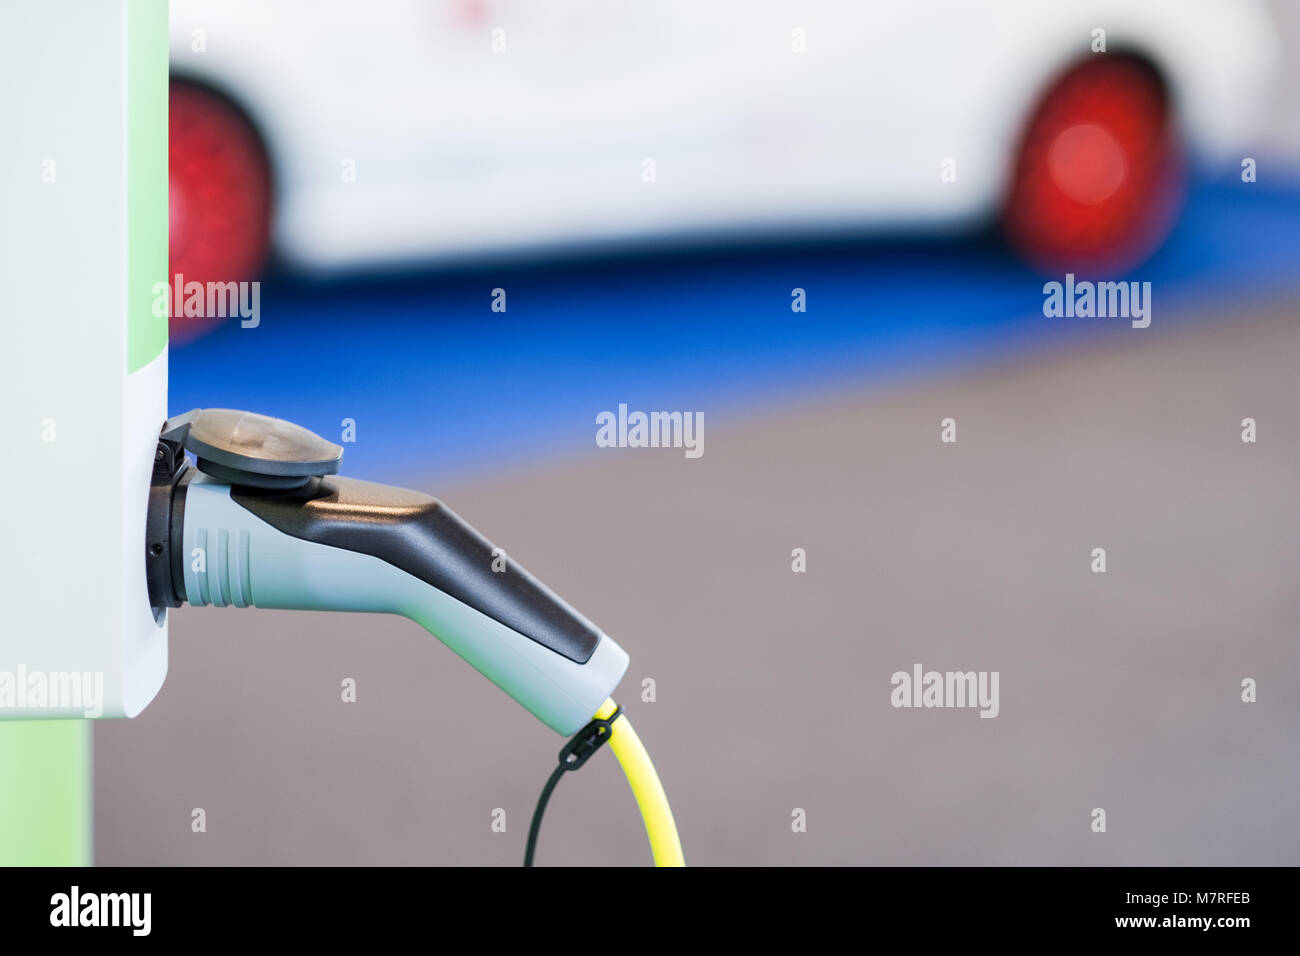 Electric car concept - closeup of the plug for charging on charge station with car in the background - selective focus with room for copy text. Stock Photo